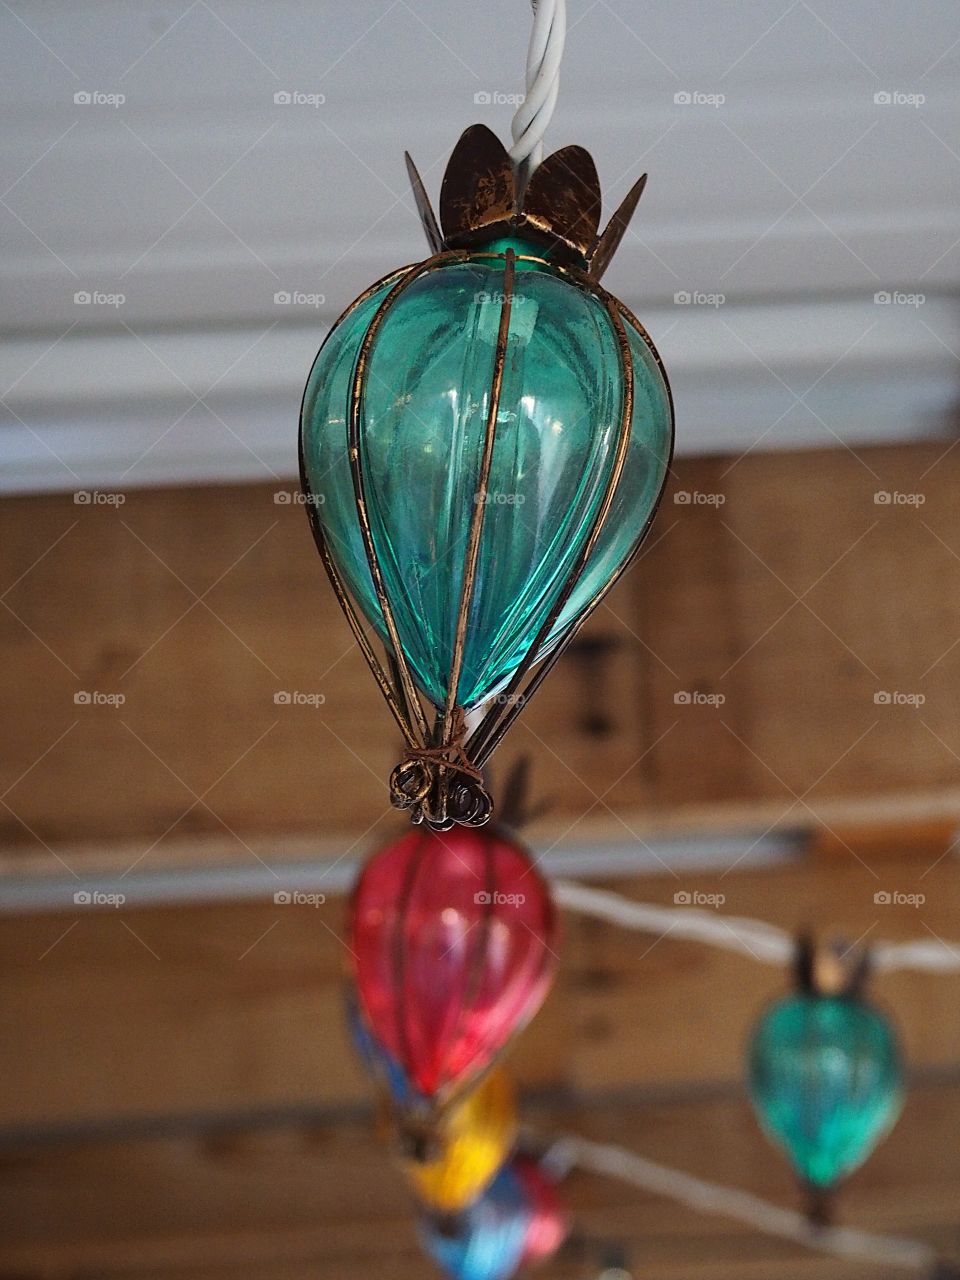 A turquoise outdoor decorative light with thick wire accents close up with a string of blurred lights of other colors in the background. 